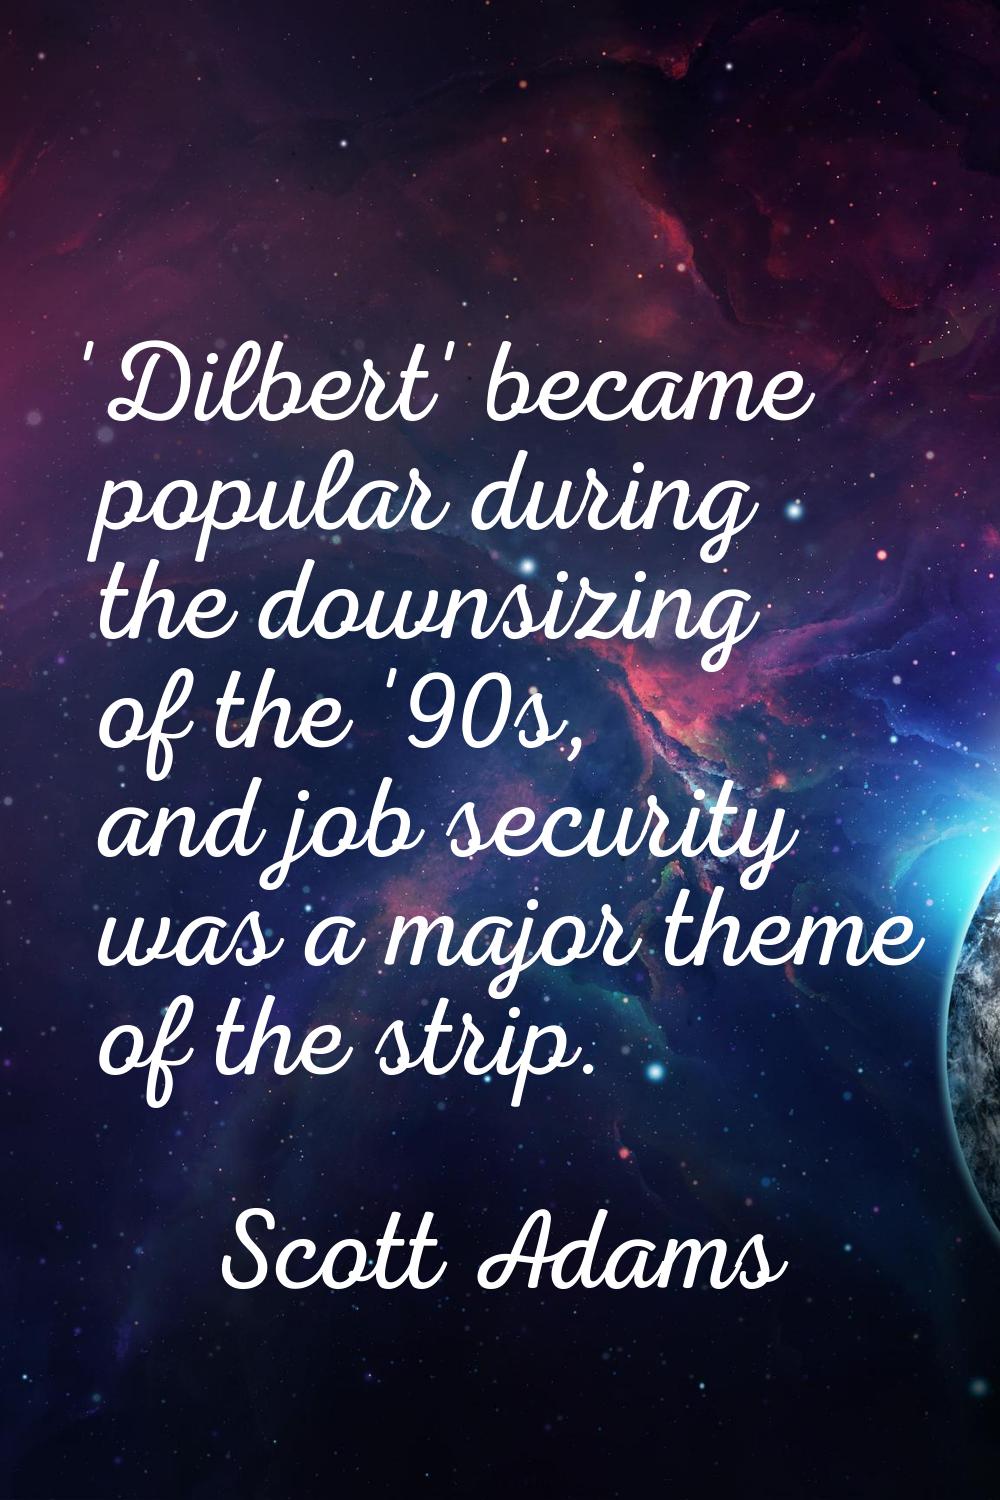 'Dilbert' became popular during the downsizing of the '90s, and job security was a major theme of t